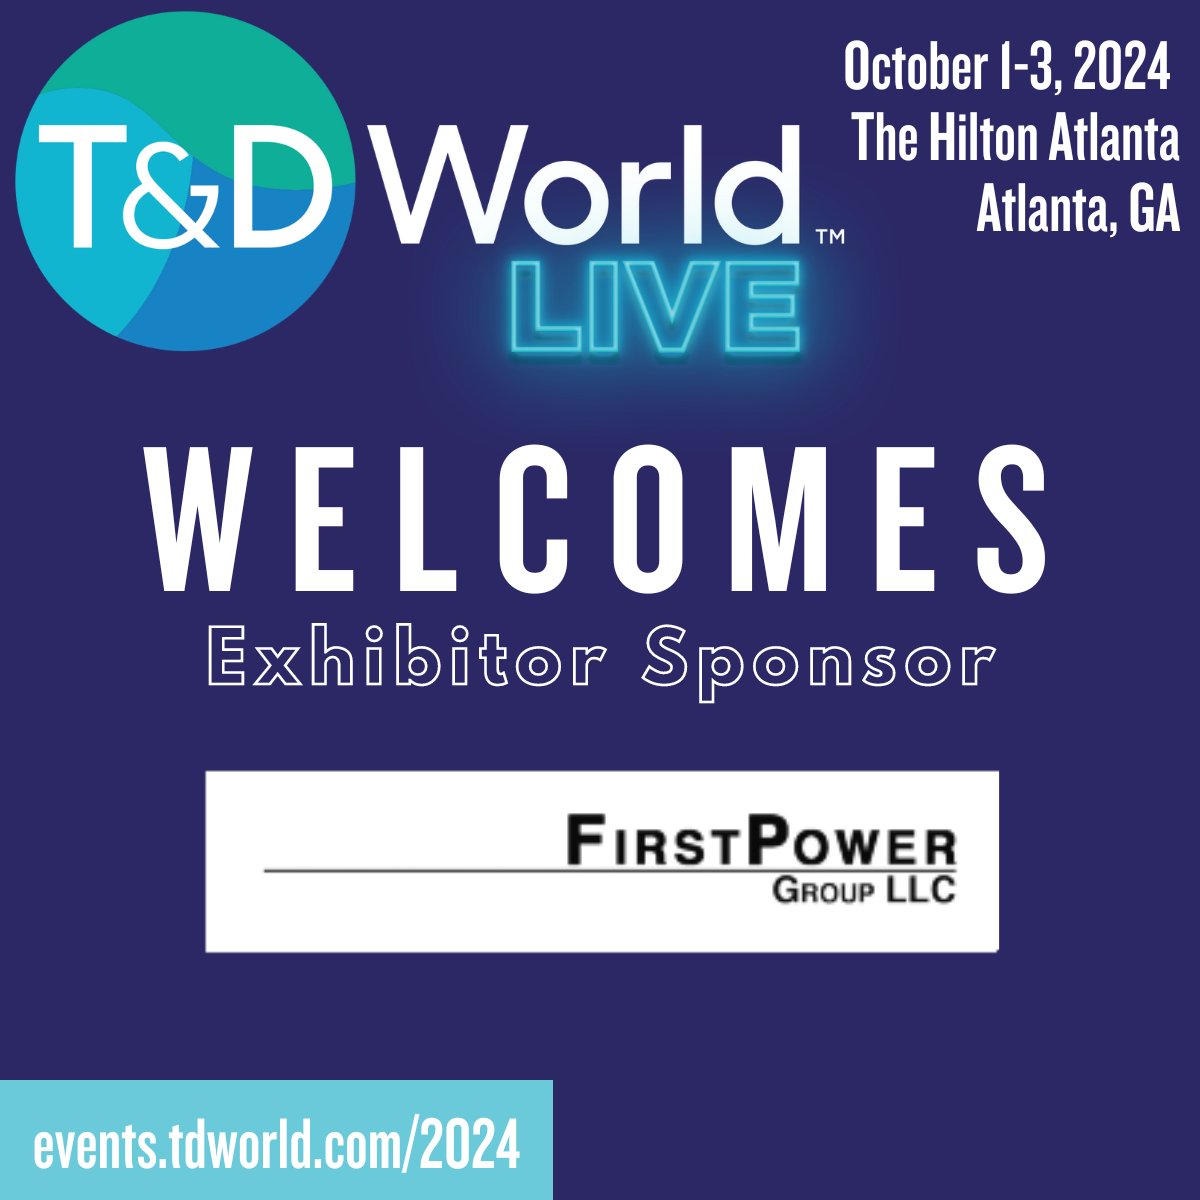 T&D World Live 2024 welcomes exhibitor sponsor: First Power LLC T&D World Live provides a fresh alternative to hear from and connect with other utilities to gain knowledge and insights into the challenging, yet exciting future of energy transformation. Join us October 1-3!